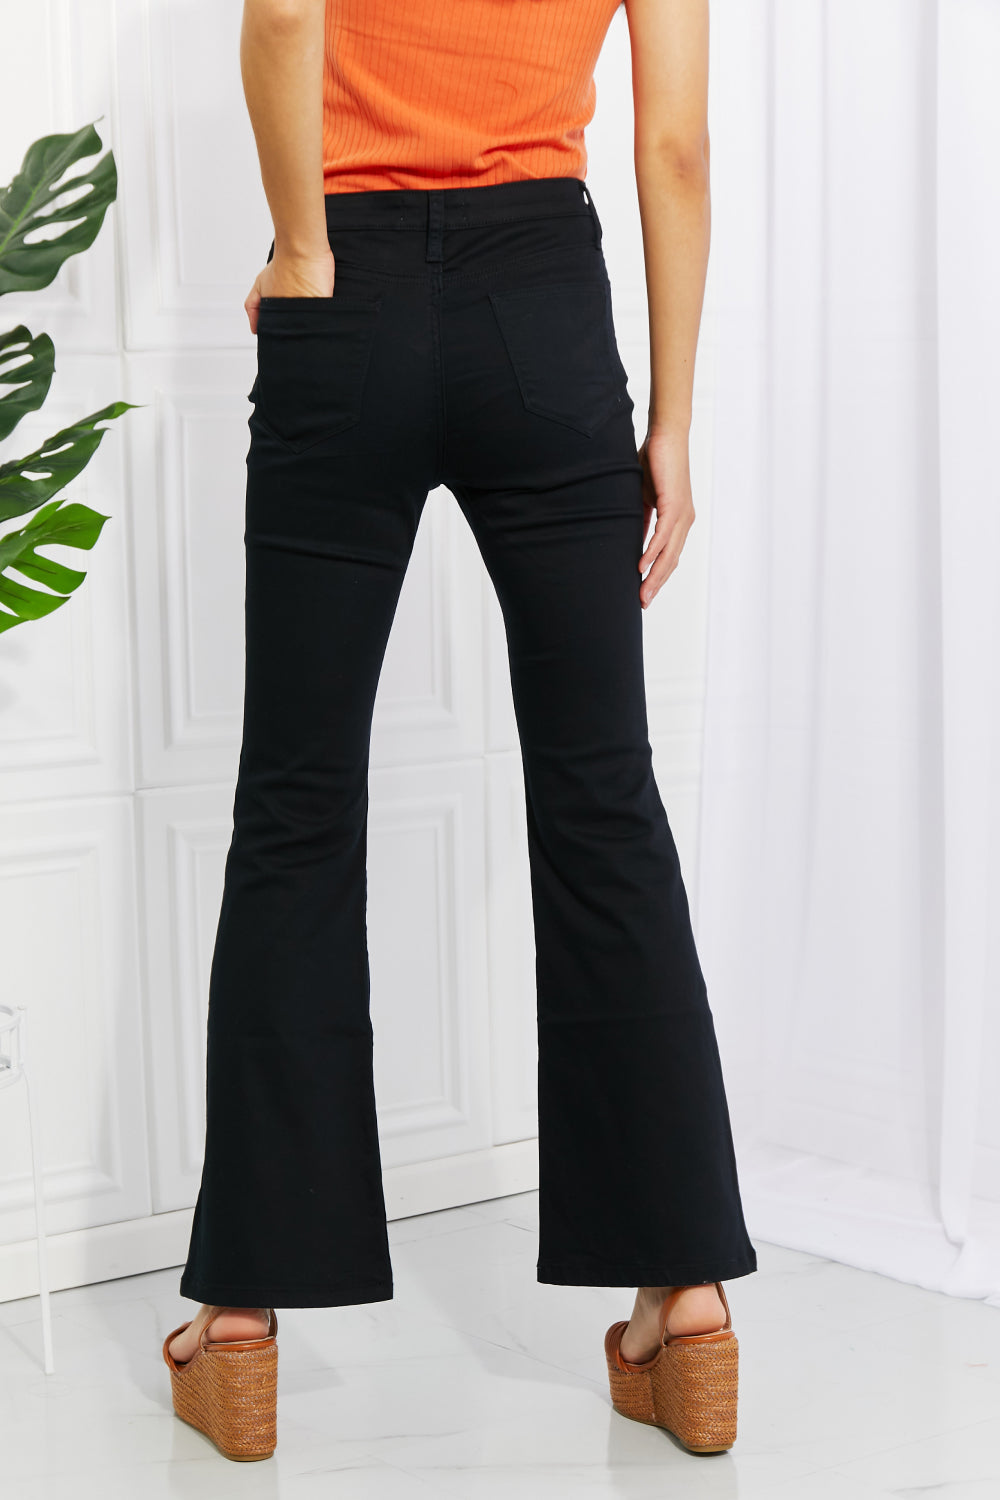 Zenana Clementine High-Rise Bootcut Pants in Black  Southern Soul Collectives 